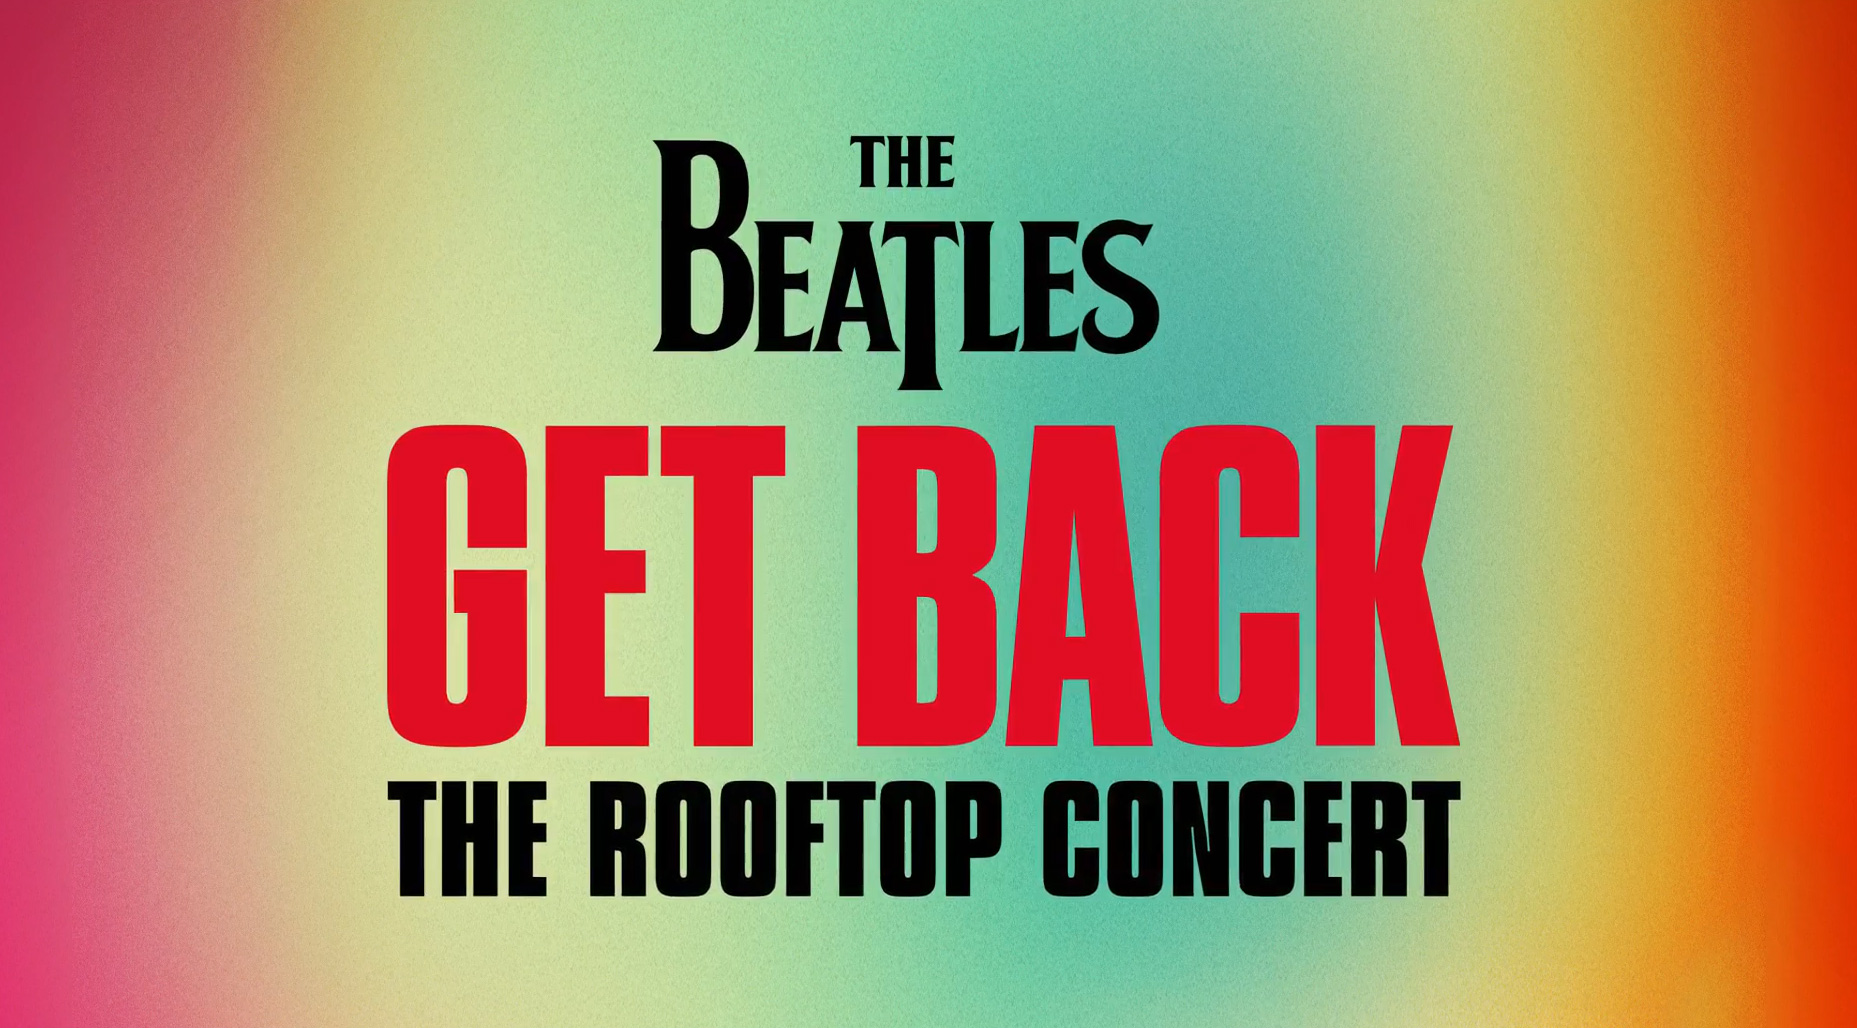 Trailer The Beatles: Get Back - The Rooftop Concert, nei cinema IMAX a Febbraio